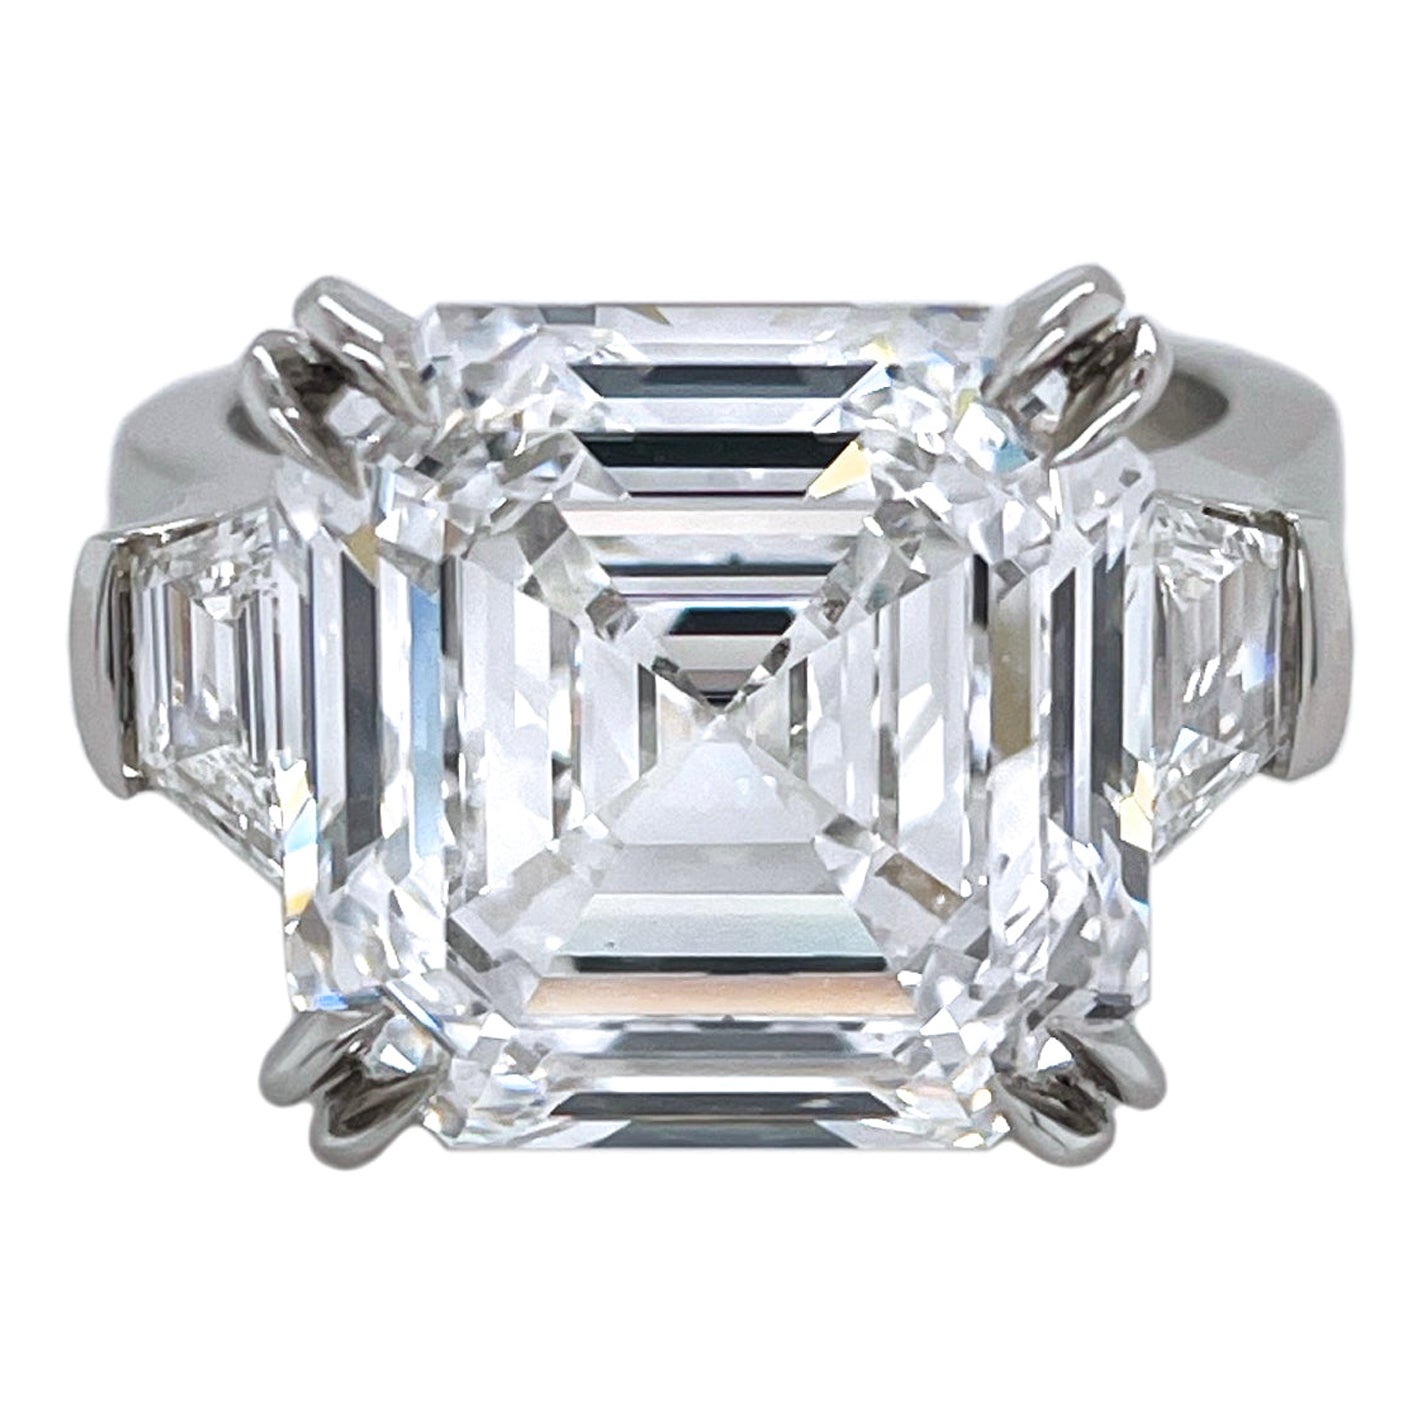 10.40 Carat D Flawless Square Emerald Cut Diamond Ring GIA Certified For Sale